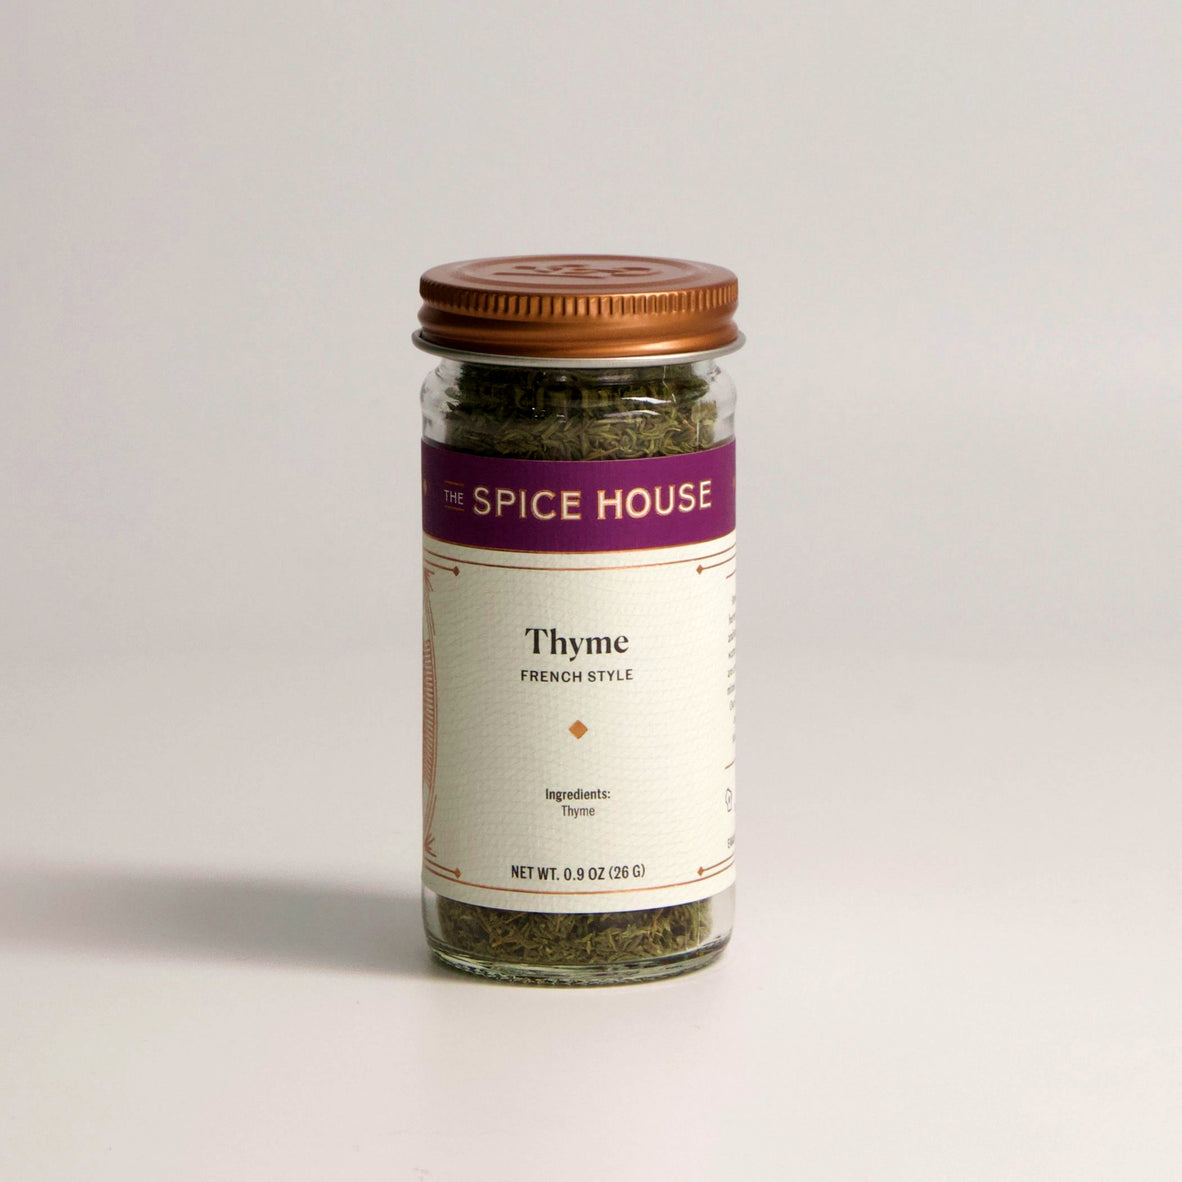 Thyme, French